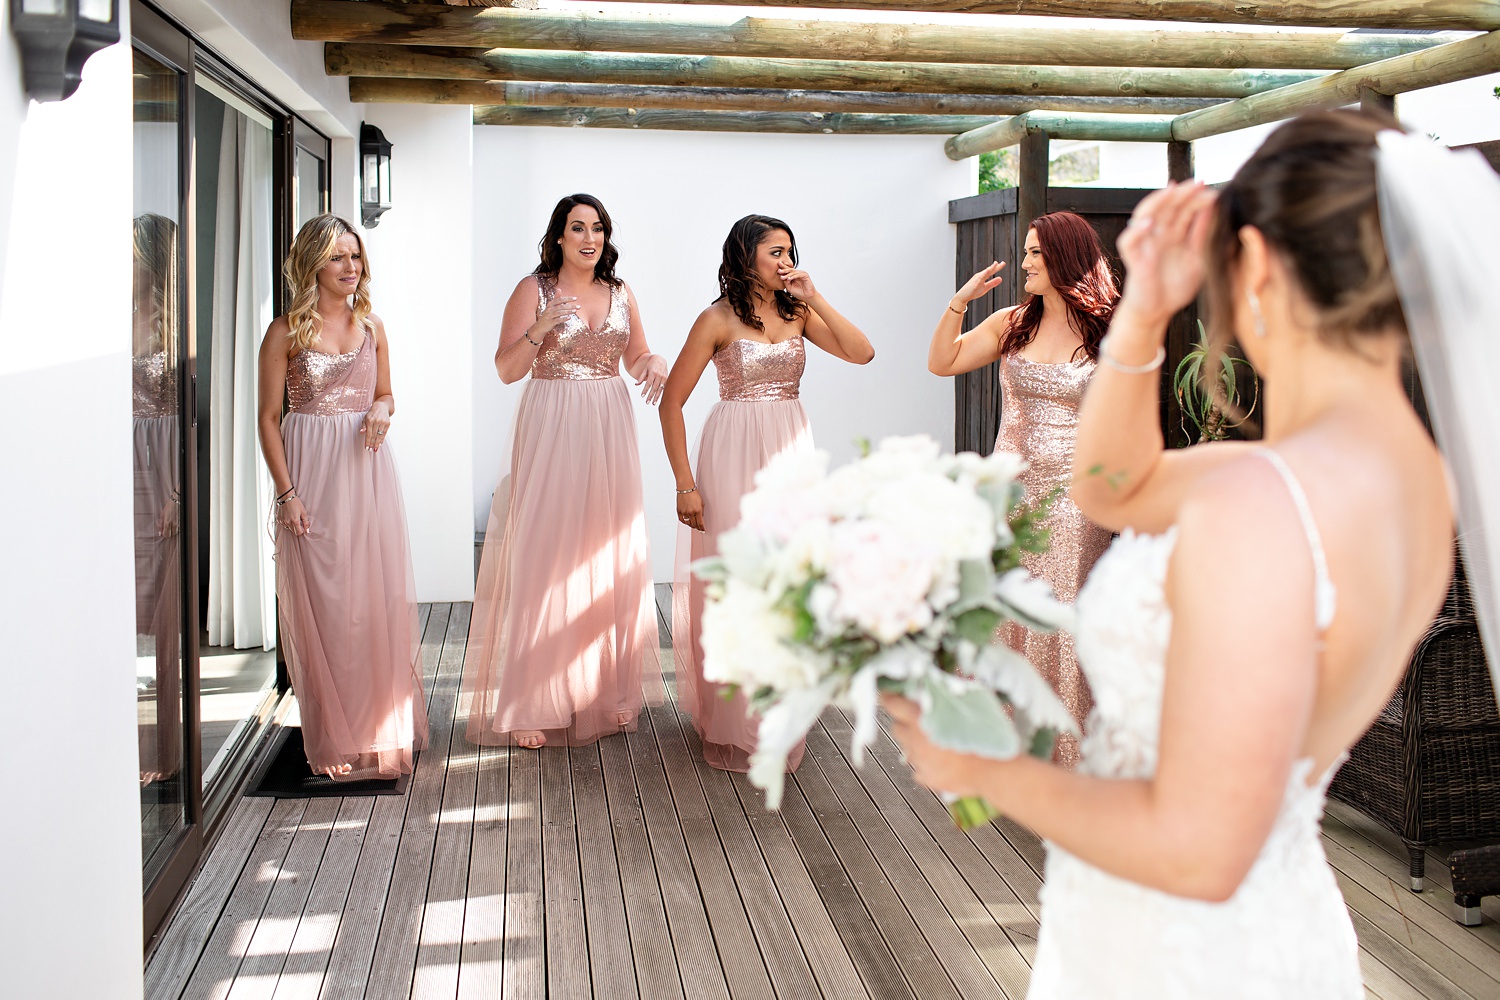 The bride has a first look with her bridesmaids and their reaction is priceless as they all start crying